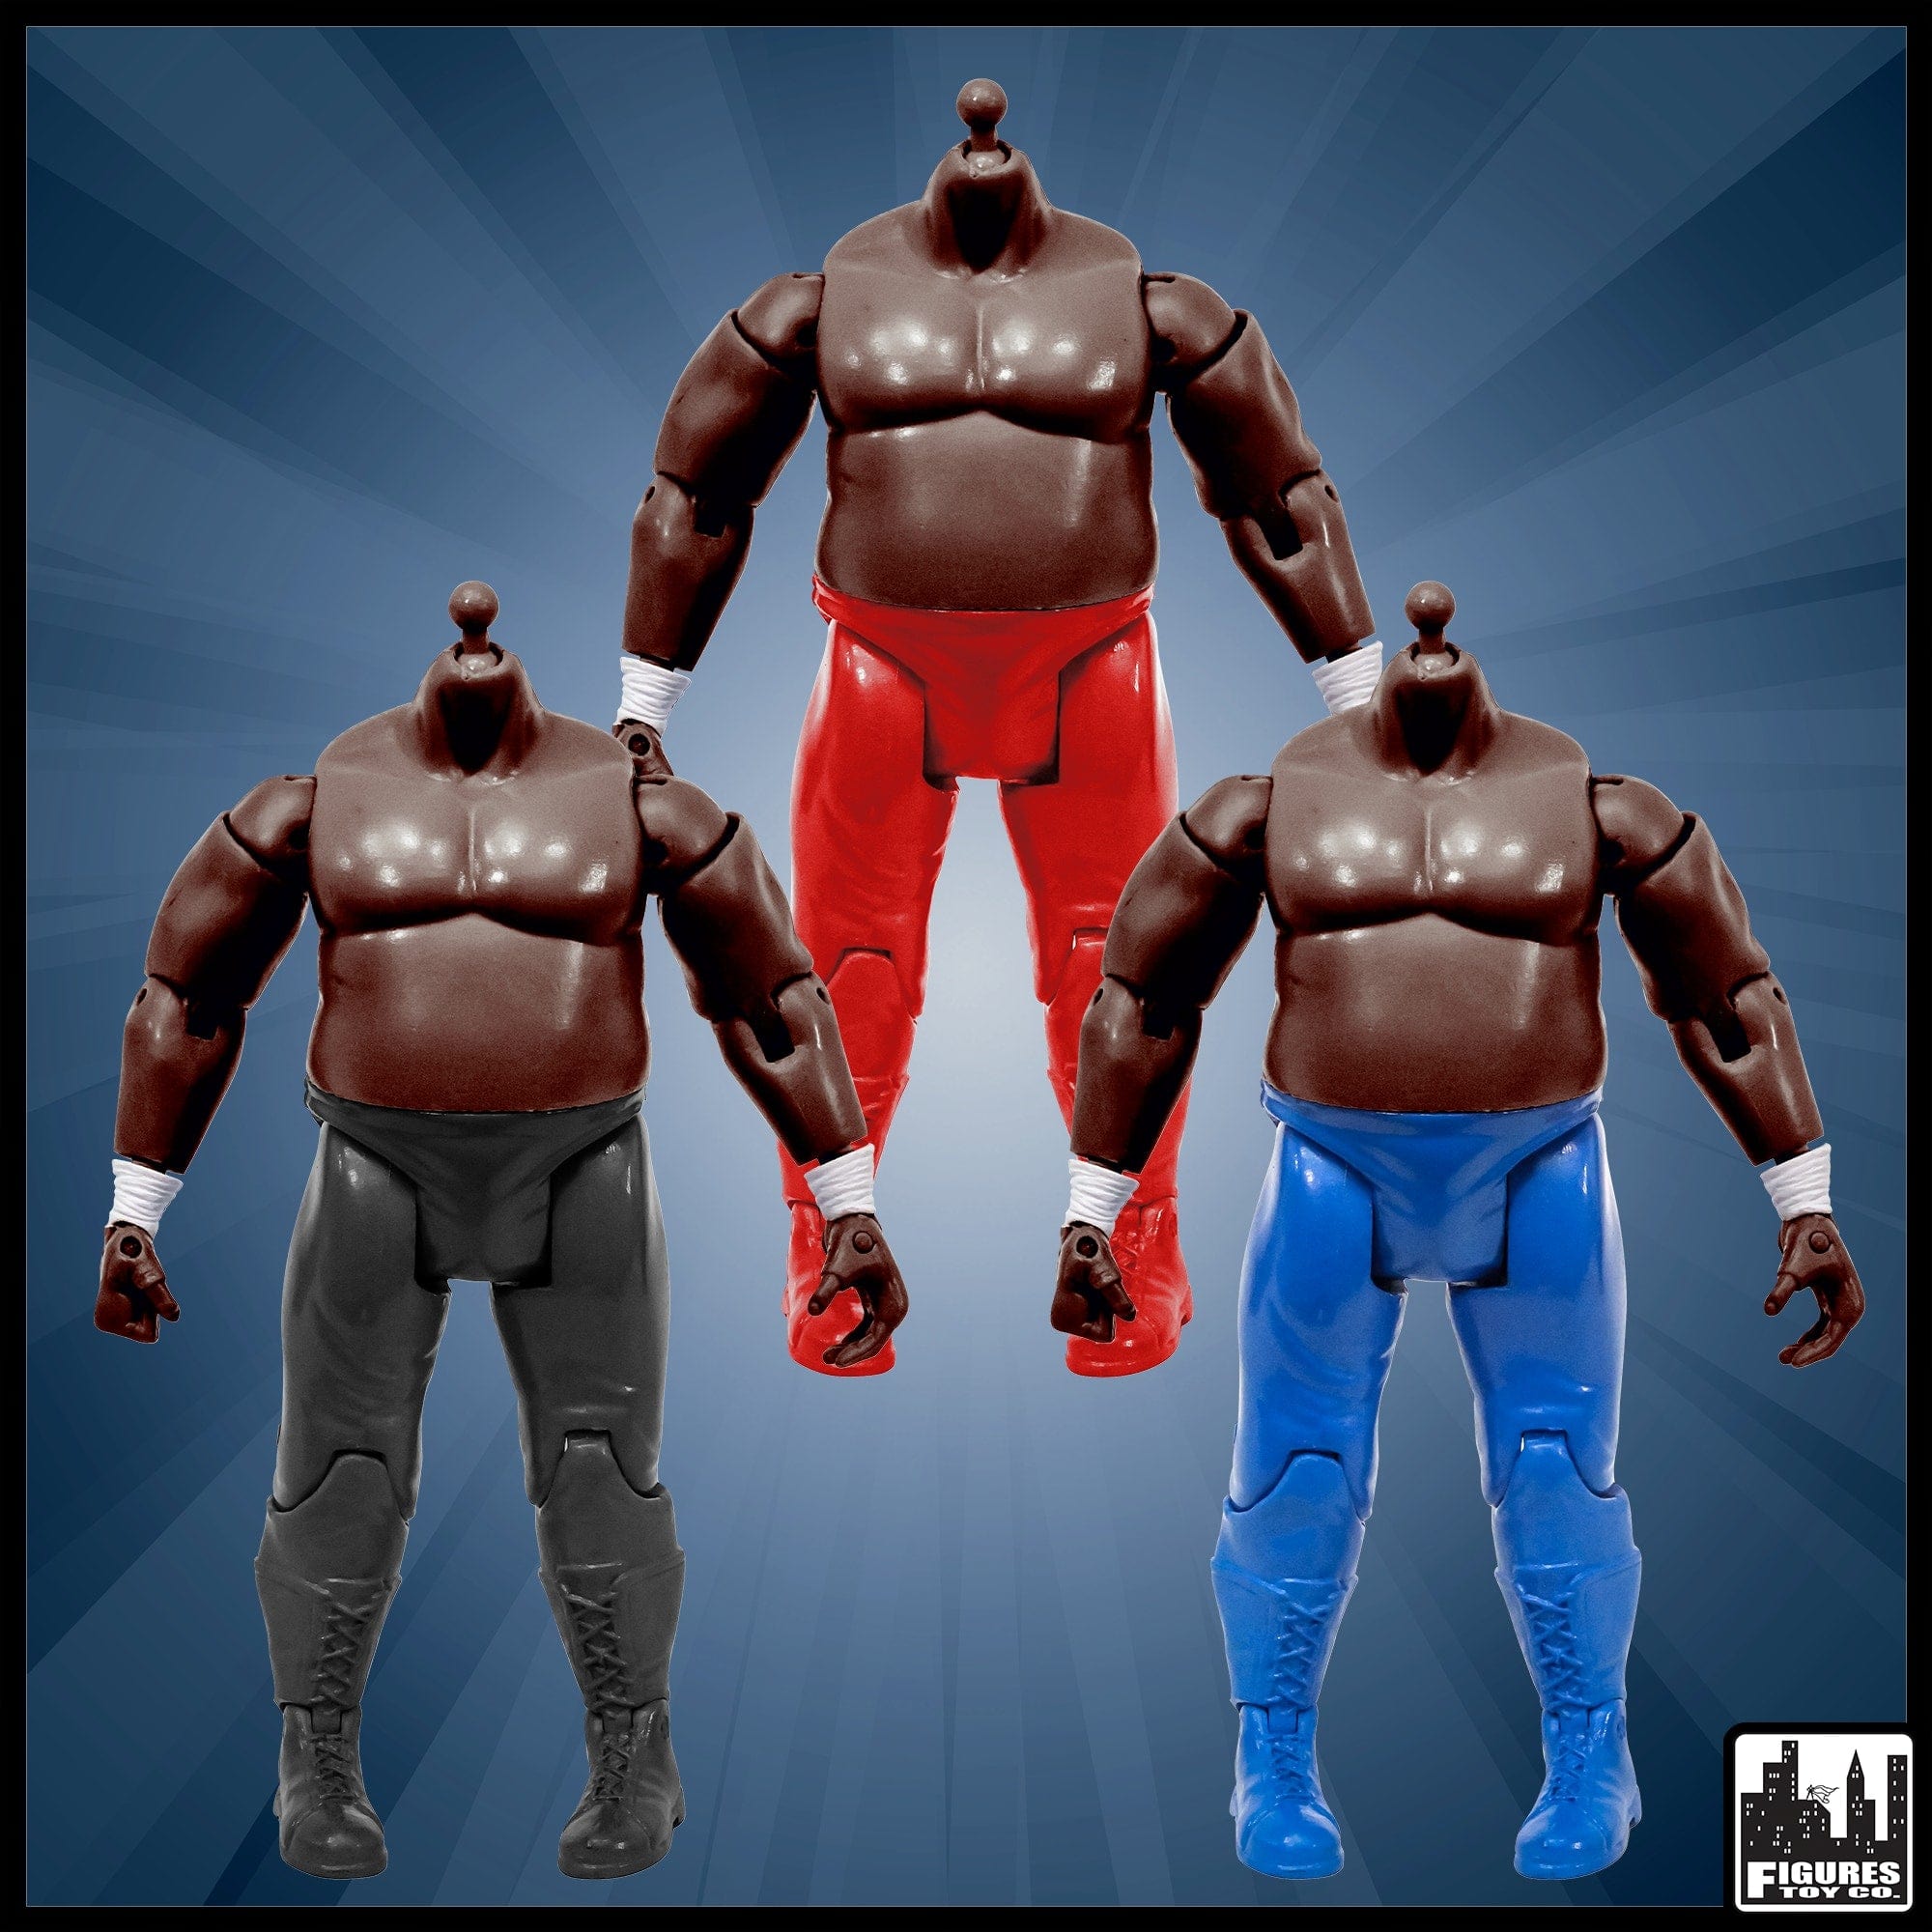 Generic 7 Inch Wrestling Action Figure With Fat African American Body